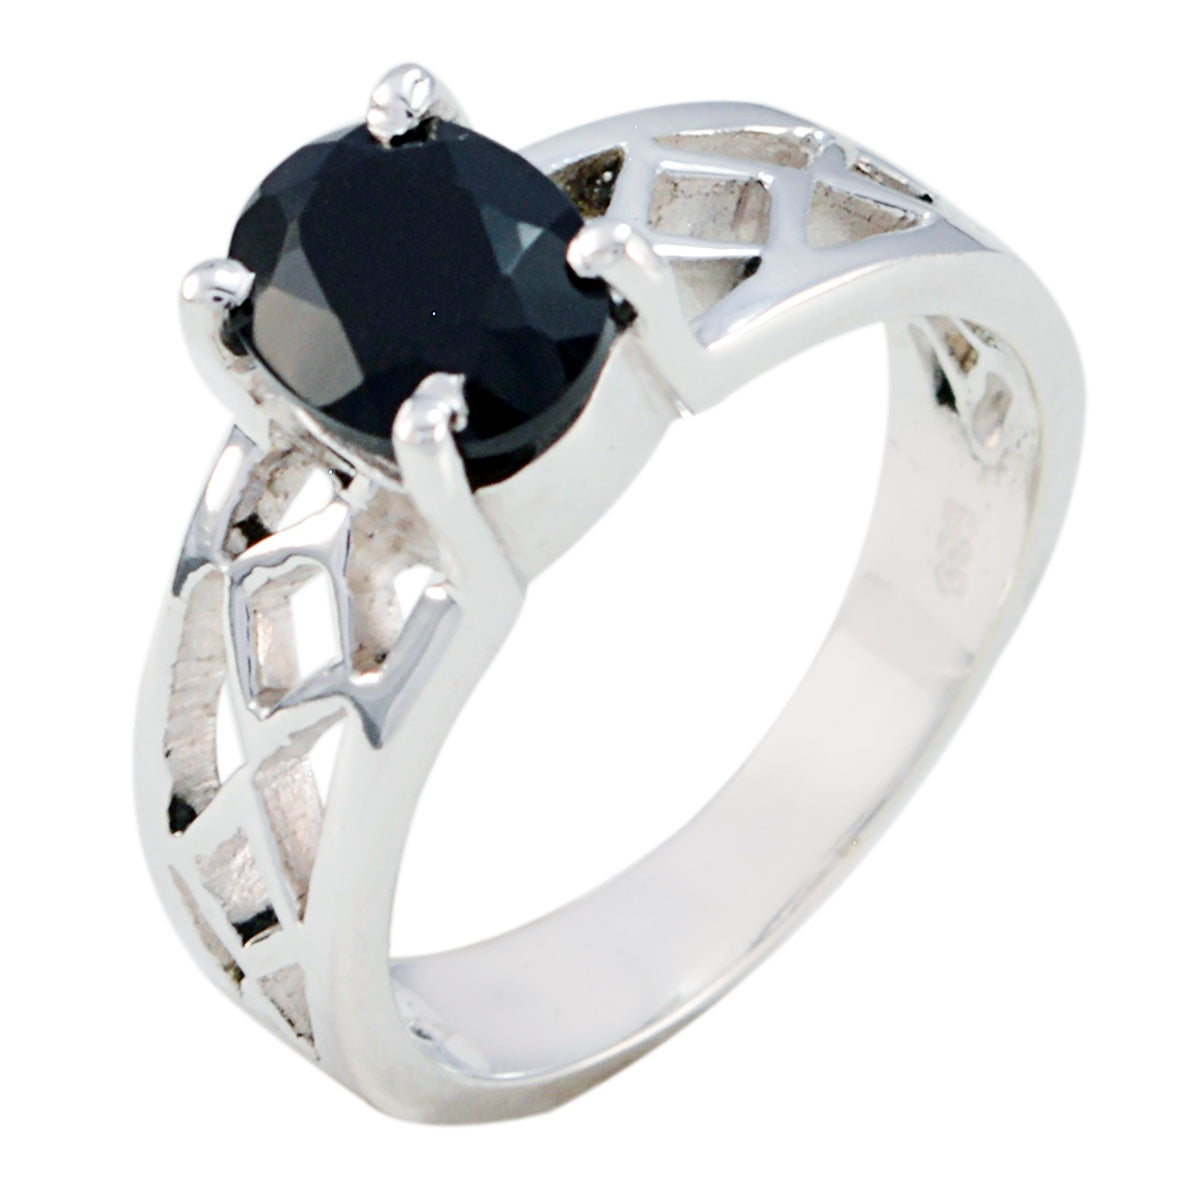 Exporter Gem Black Onyx Solid Silver Ring Healing Crystals Jewelry